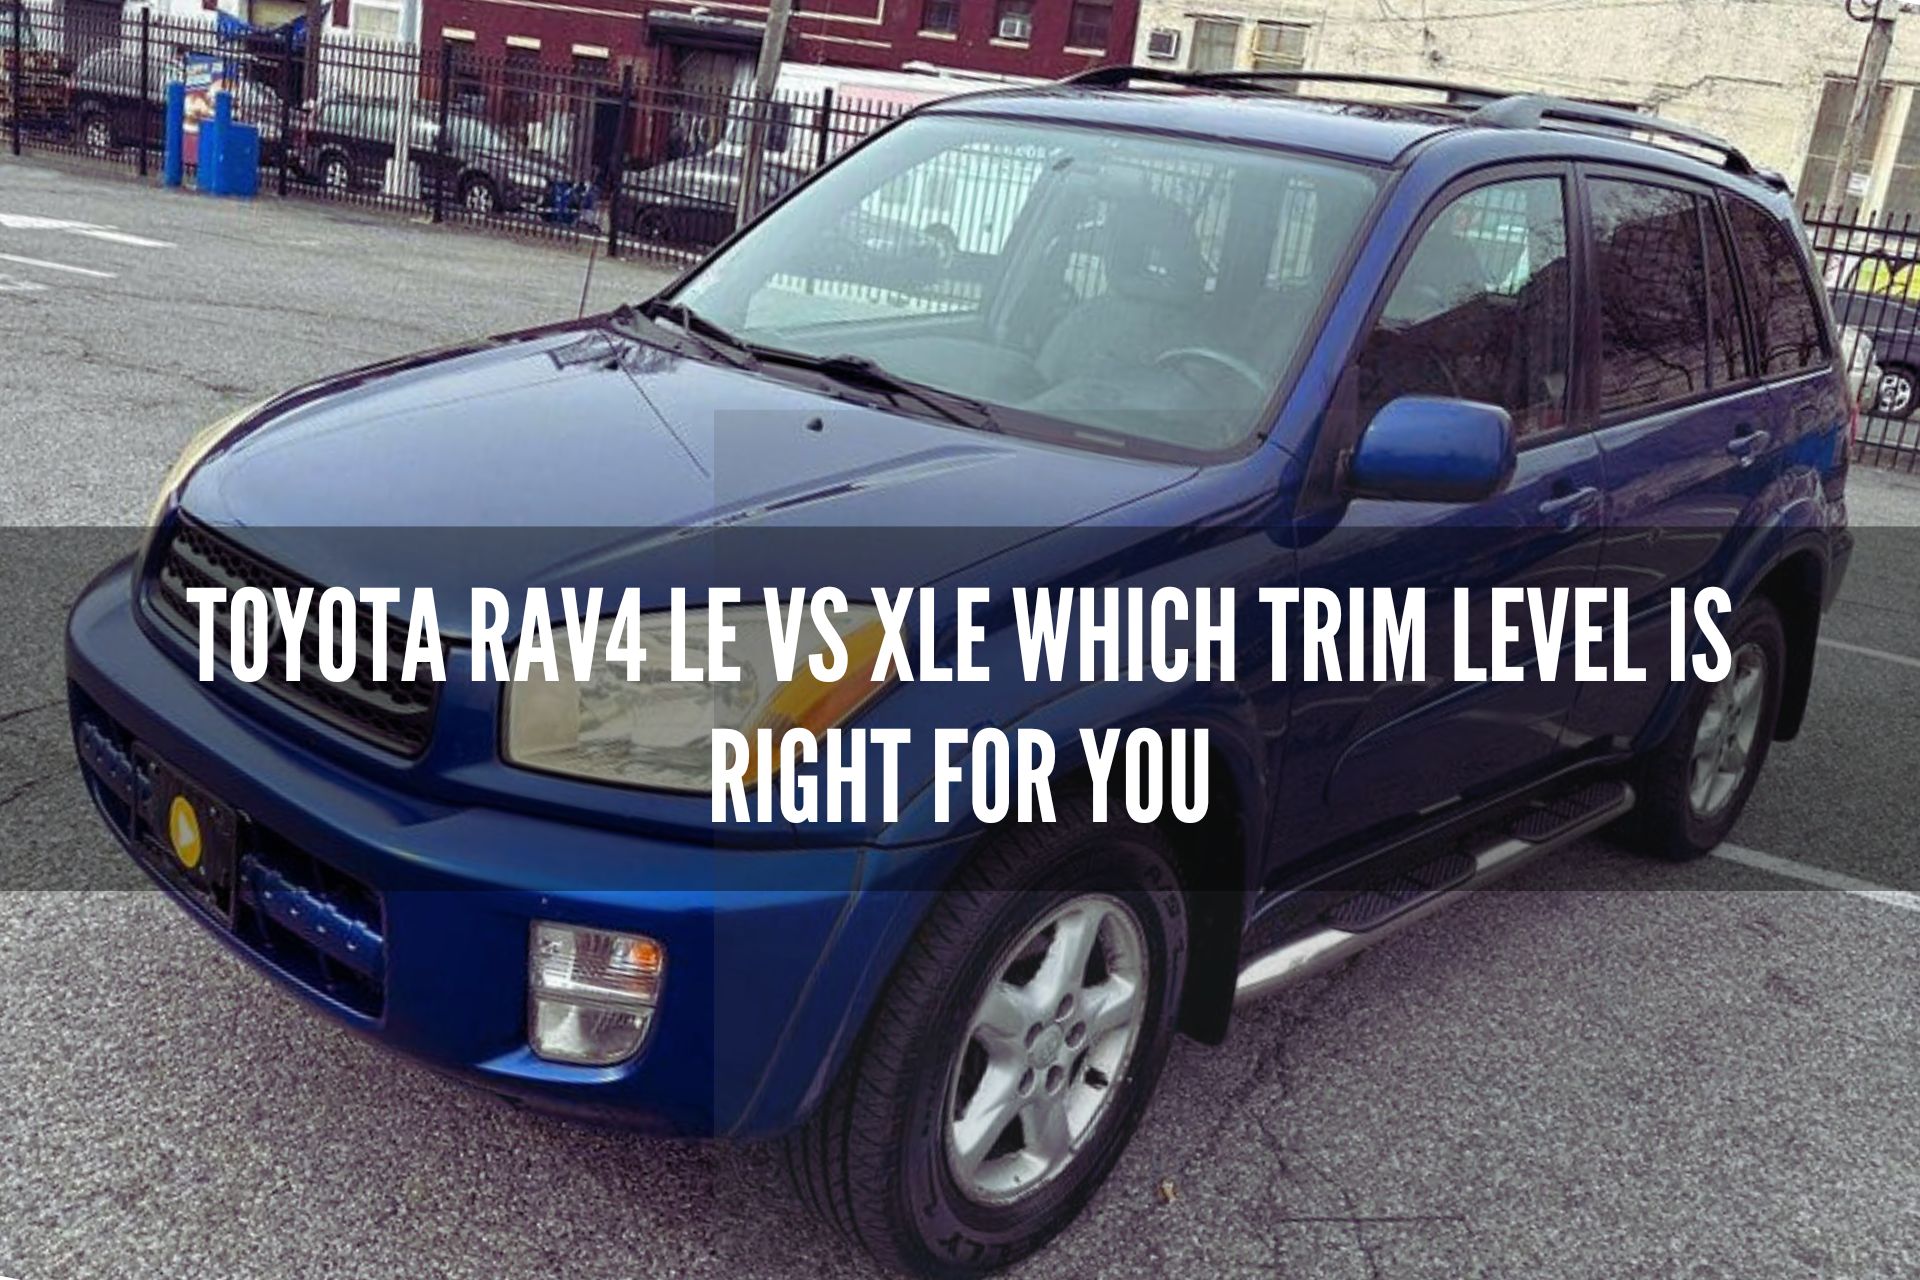 Toyota RAV4 LE vs XLE Which Trim Level is Right for You